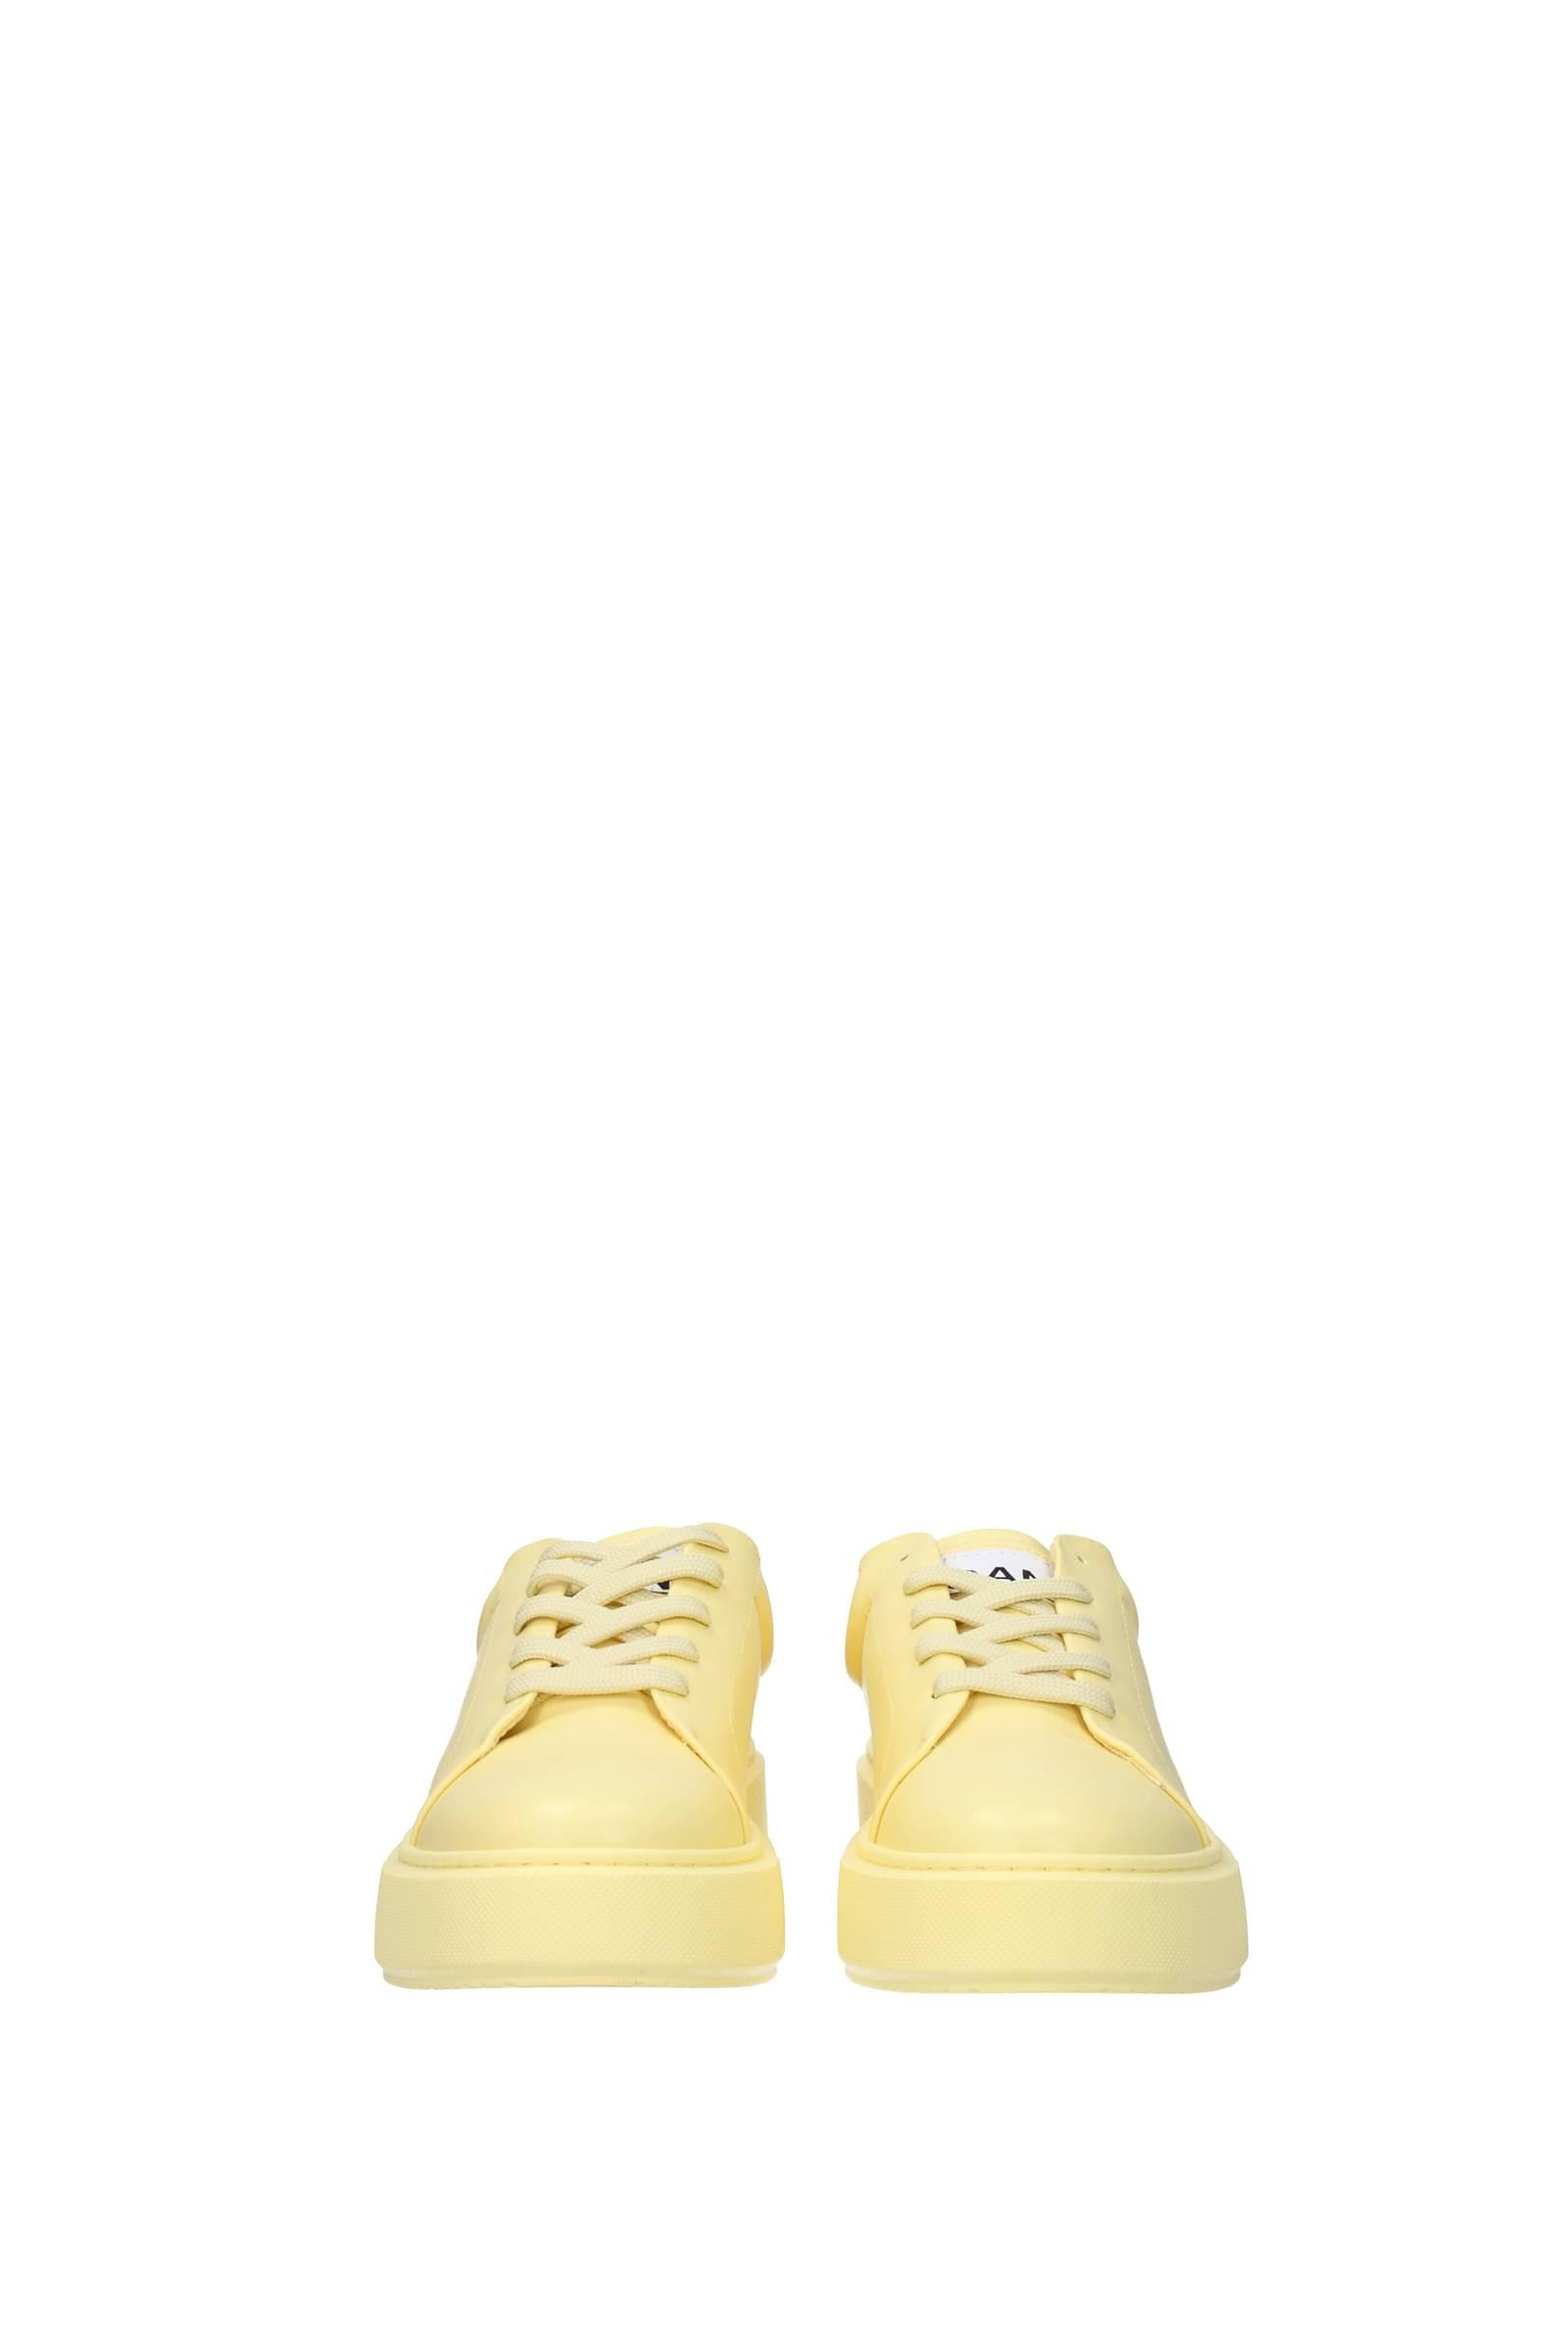 opskrift Fahrenheit Køre ud Ganni Sneakers Leather Yellow Banana | Lyst